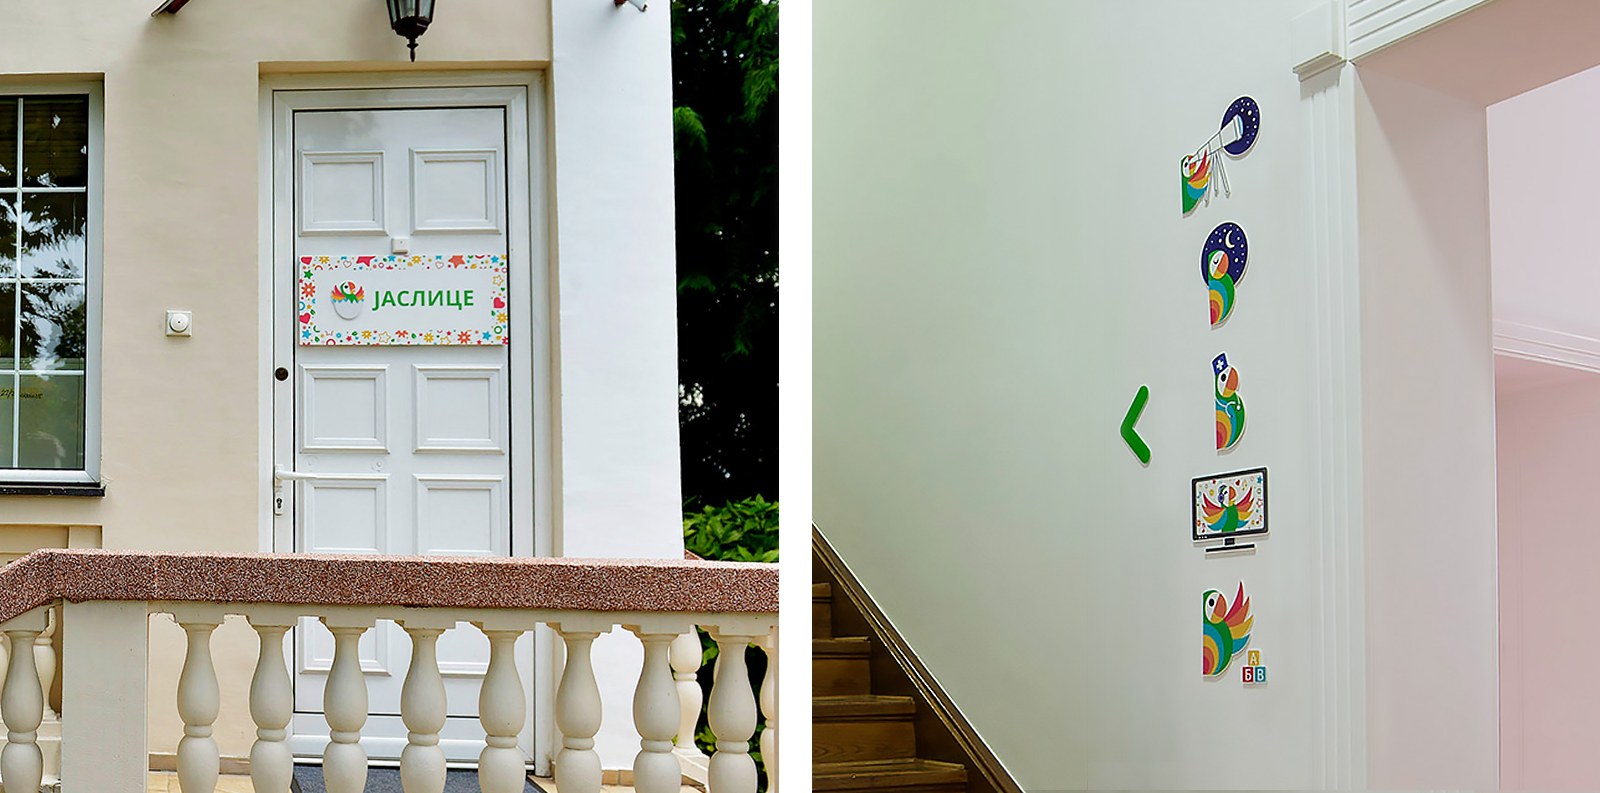 bambinosi wayfinding design - photos from the kindergarten, door with a sign and icons used as wayfinding on a wall